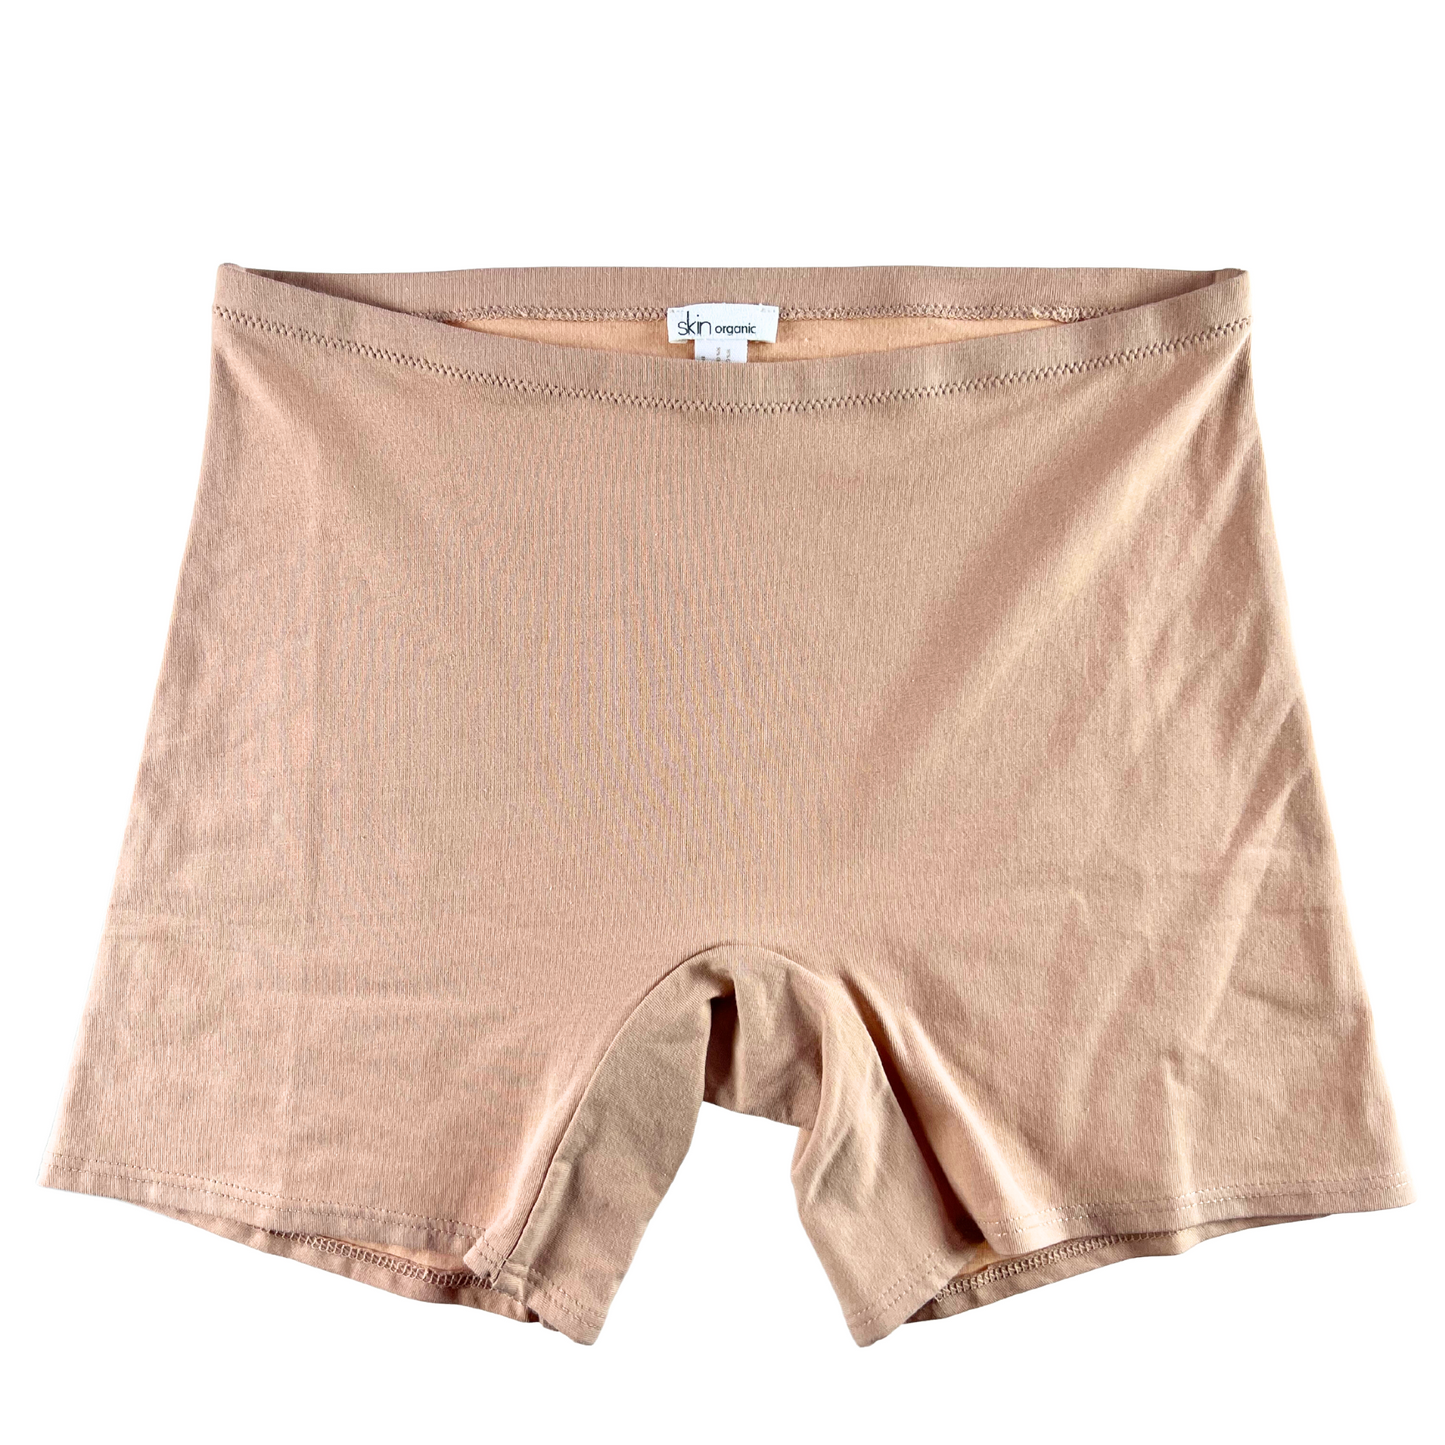 Shop comfortable Women's Boxer Briefs and Shorts at a discount